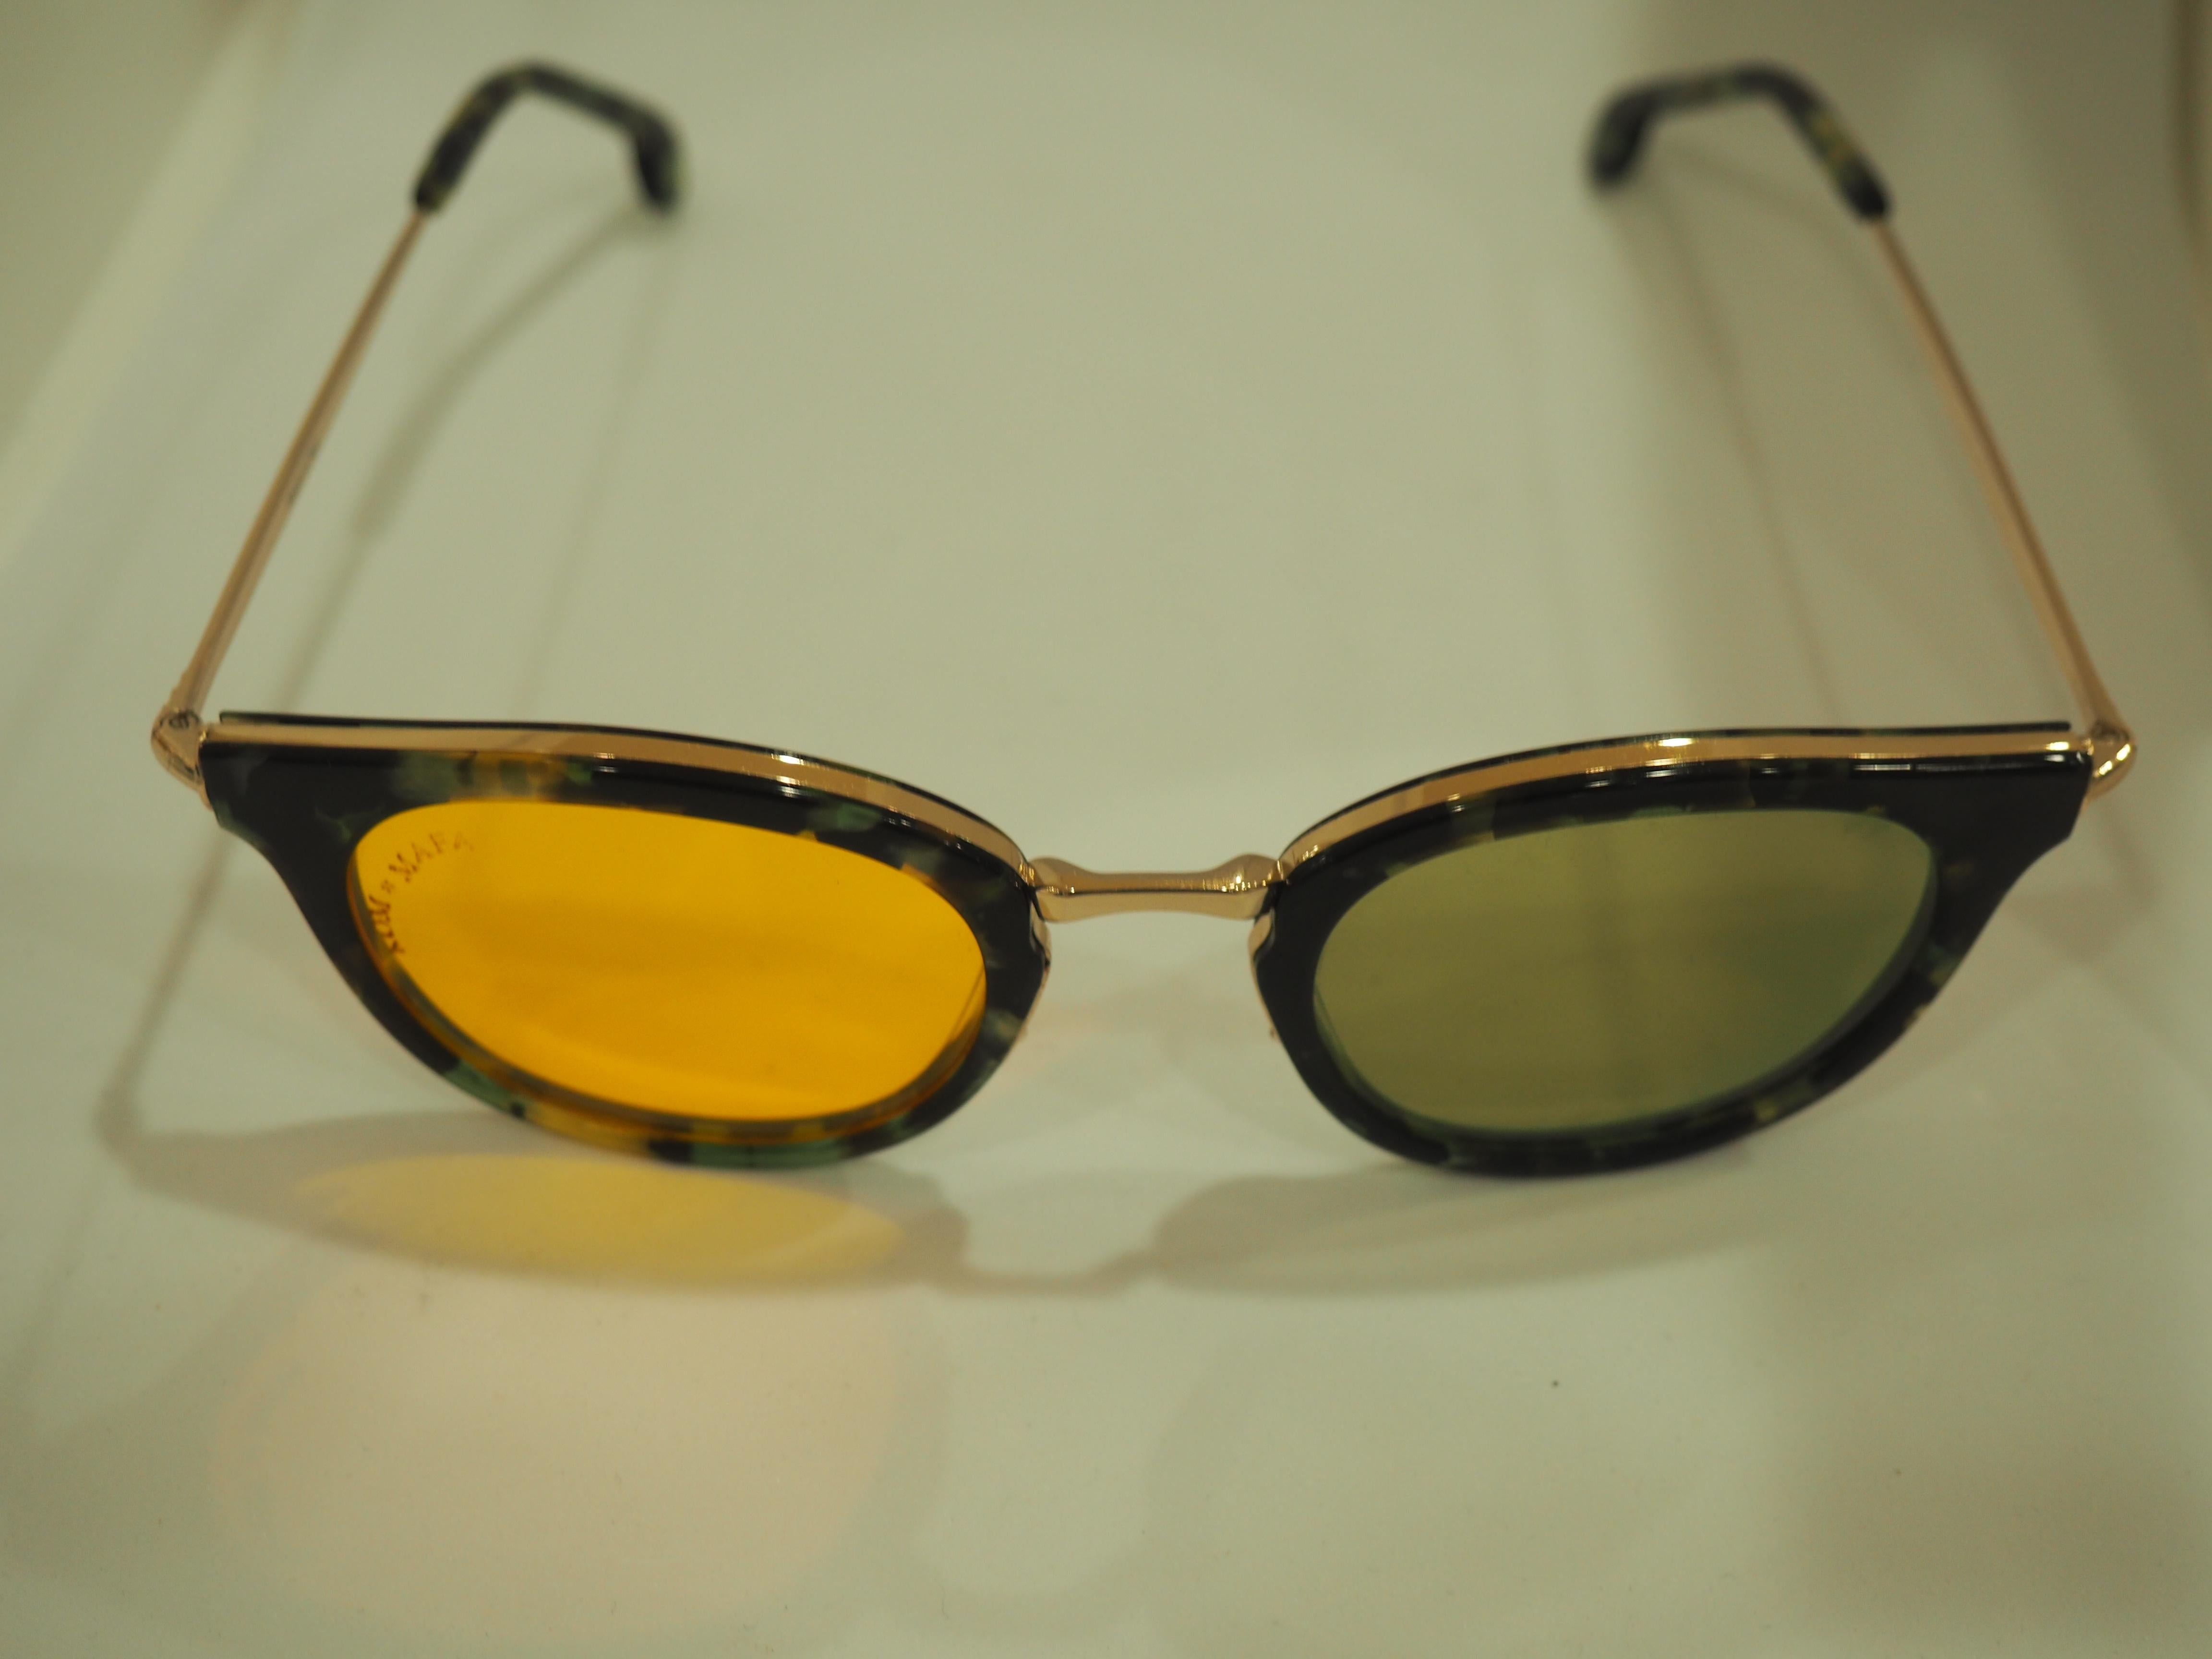 Kommafa yellow green tortoise sunglasses
totally made in italy 
one of a kind